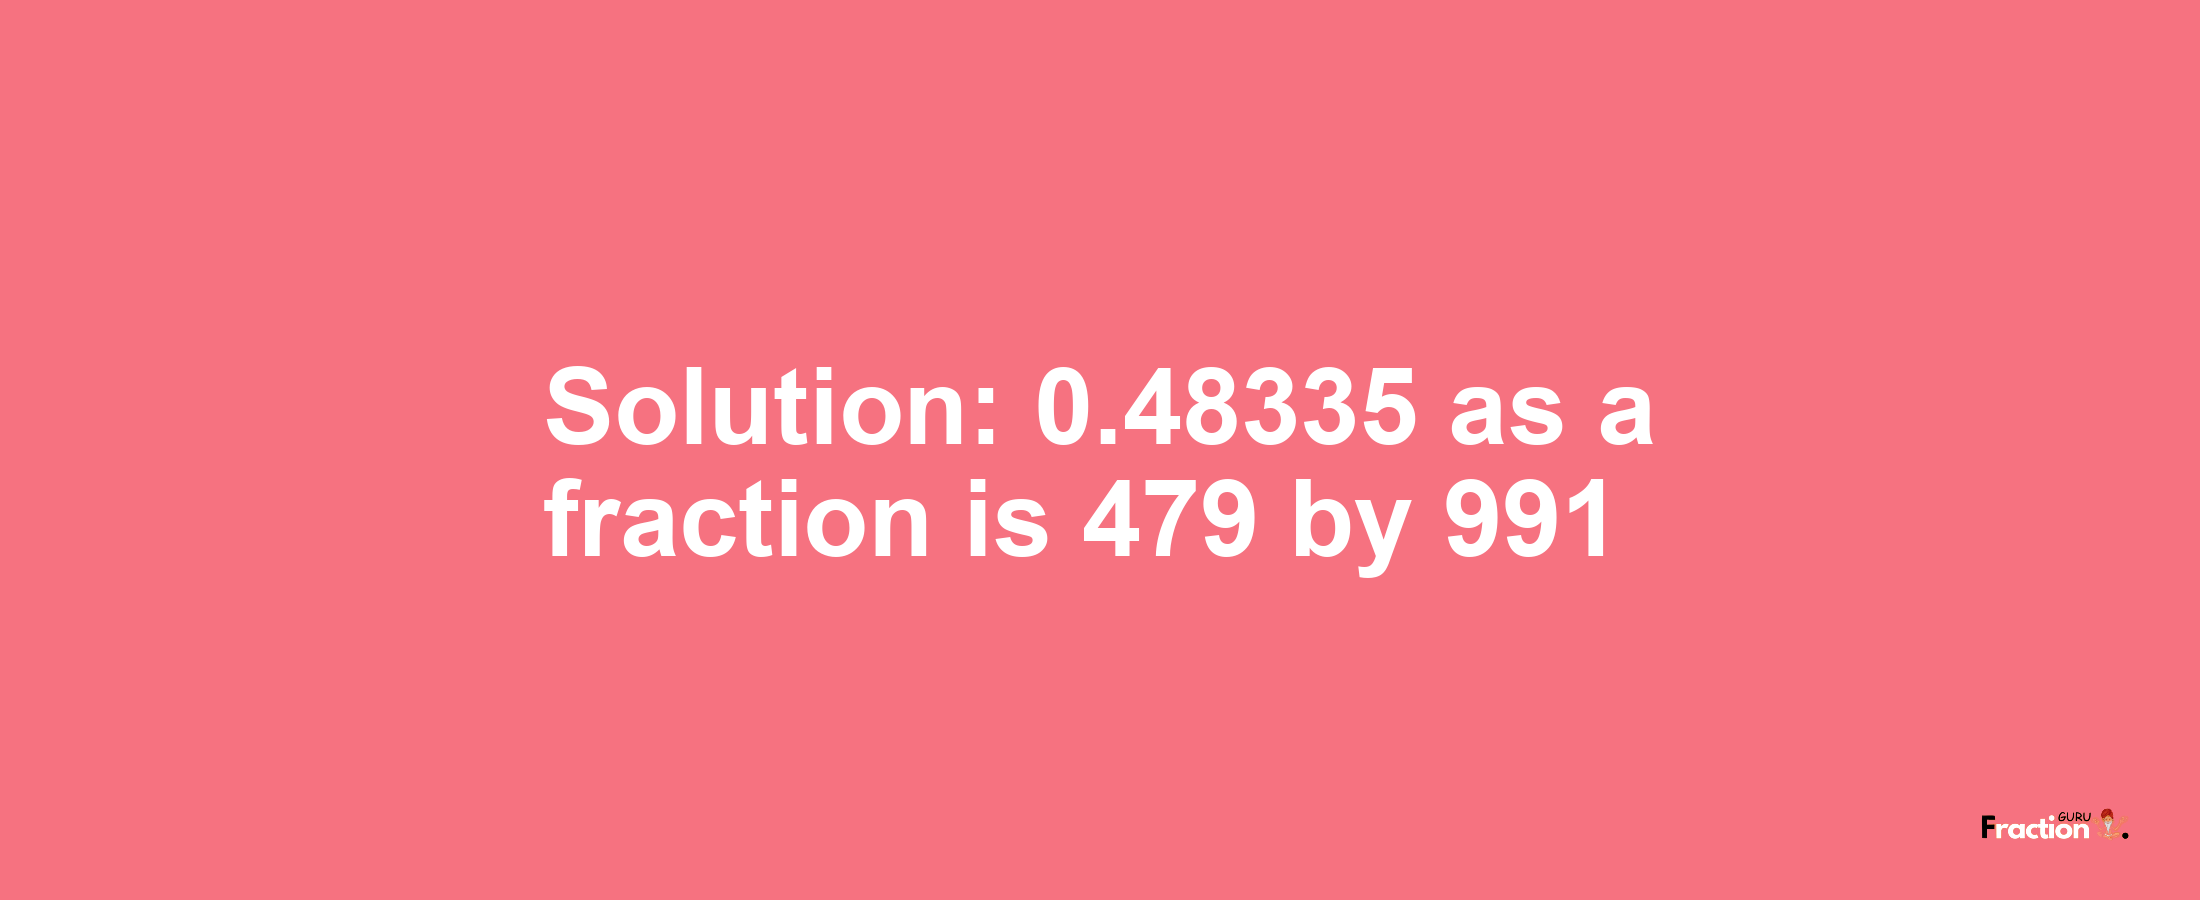 Solution:0.48335 as a fraction is 479/991